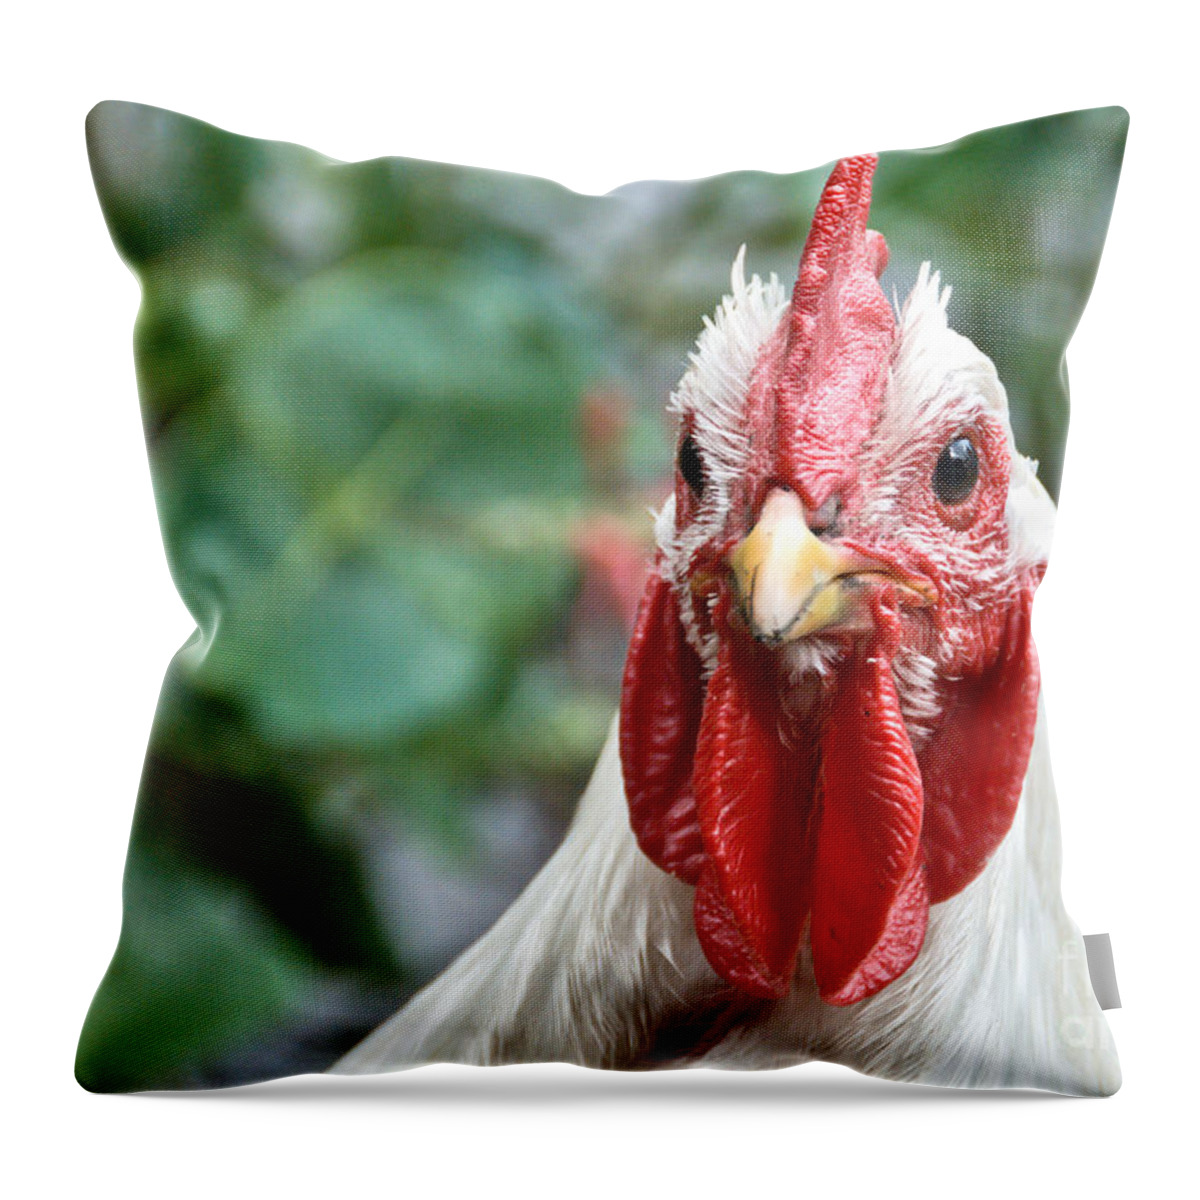 Rooster Throw Pillow featuring the photograph Cheeky Rooster by Cheryl Baxter